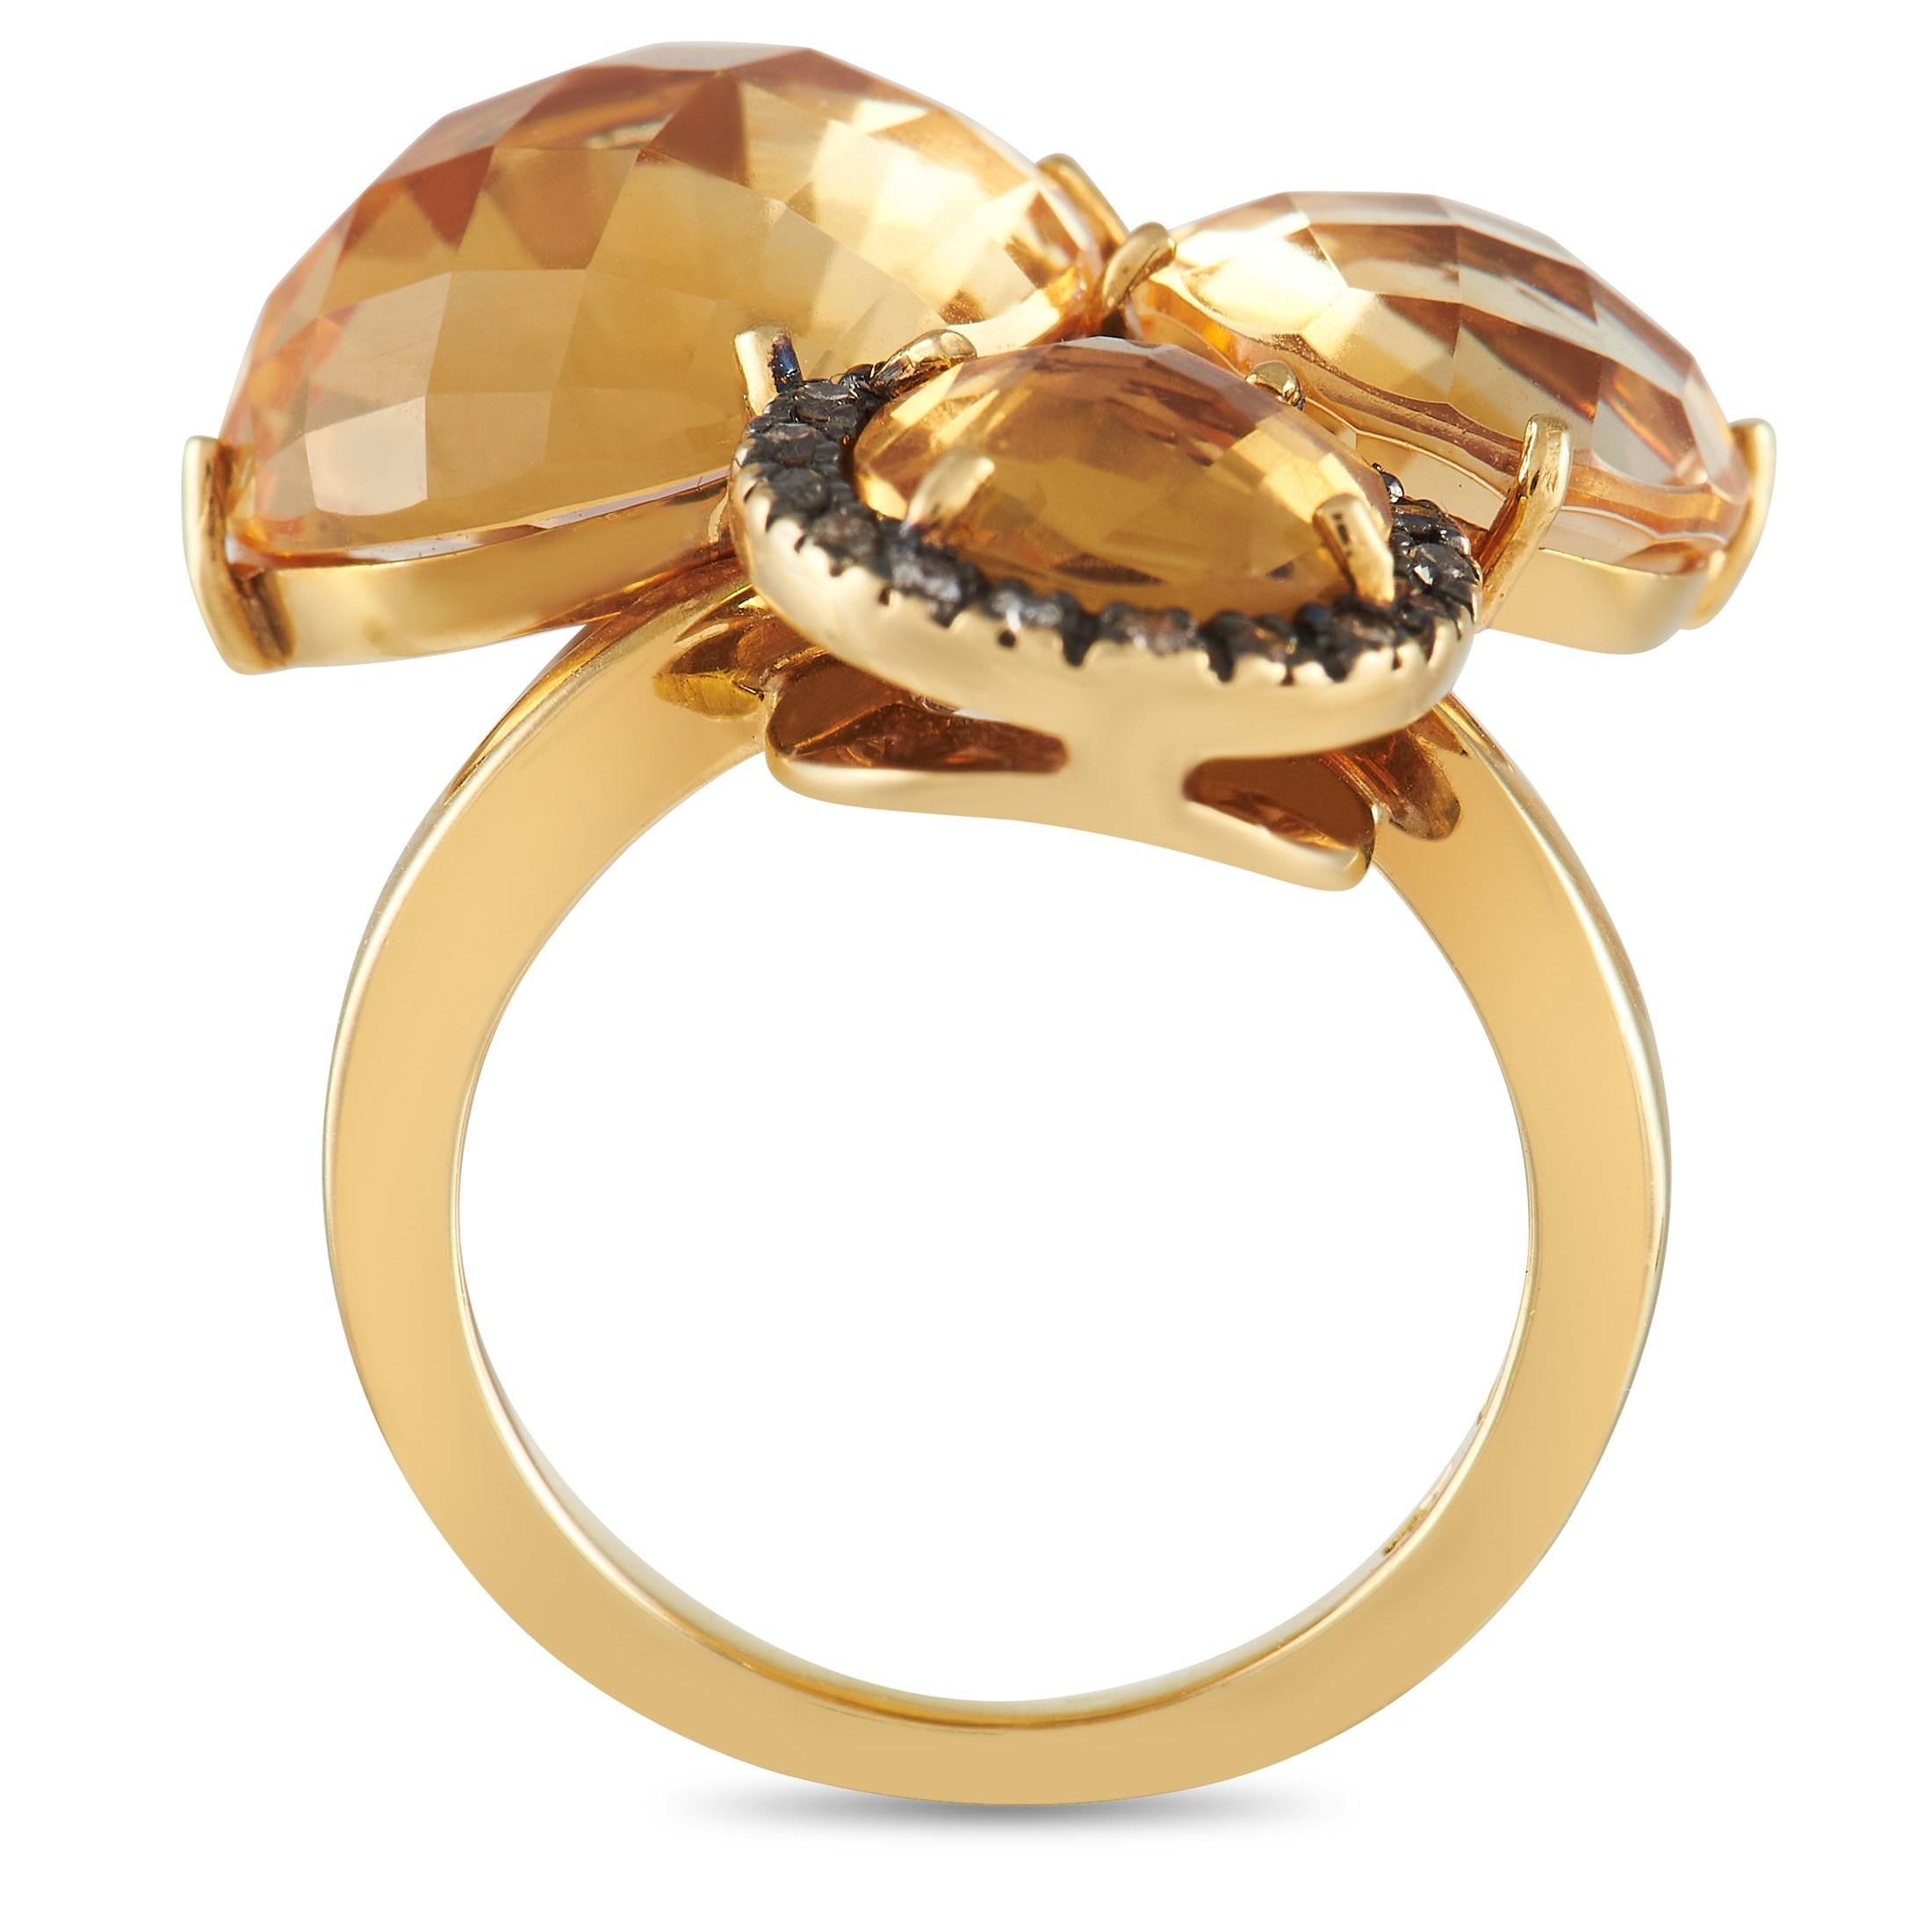 A cluster of stunning, multifaceted Citrine gemstones makes this elegant ring simply unforgettable. Sparkling diamond accents totaling 0.12 carats add extra shine to this exquisitely styled piece, which features a delicate 1mm band and a dramatic